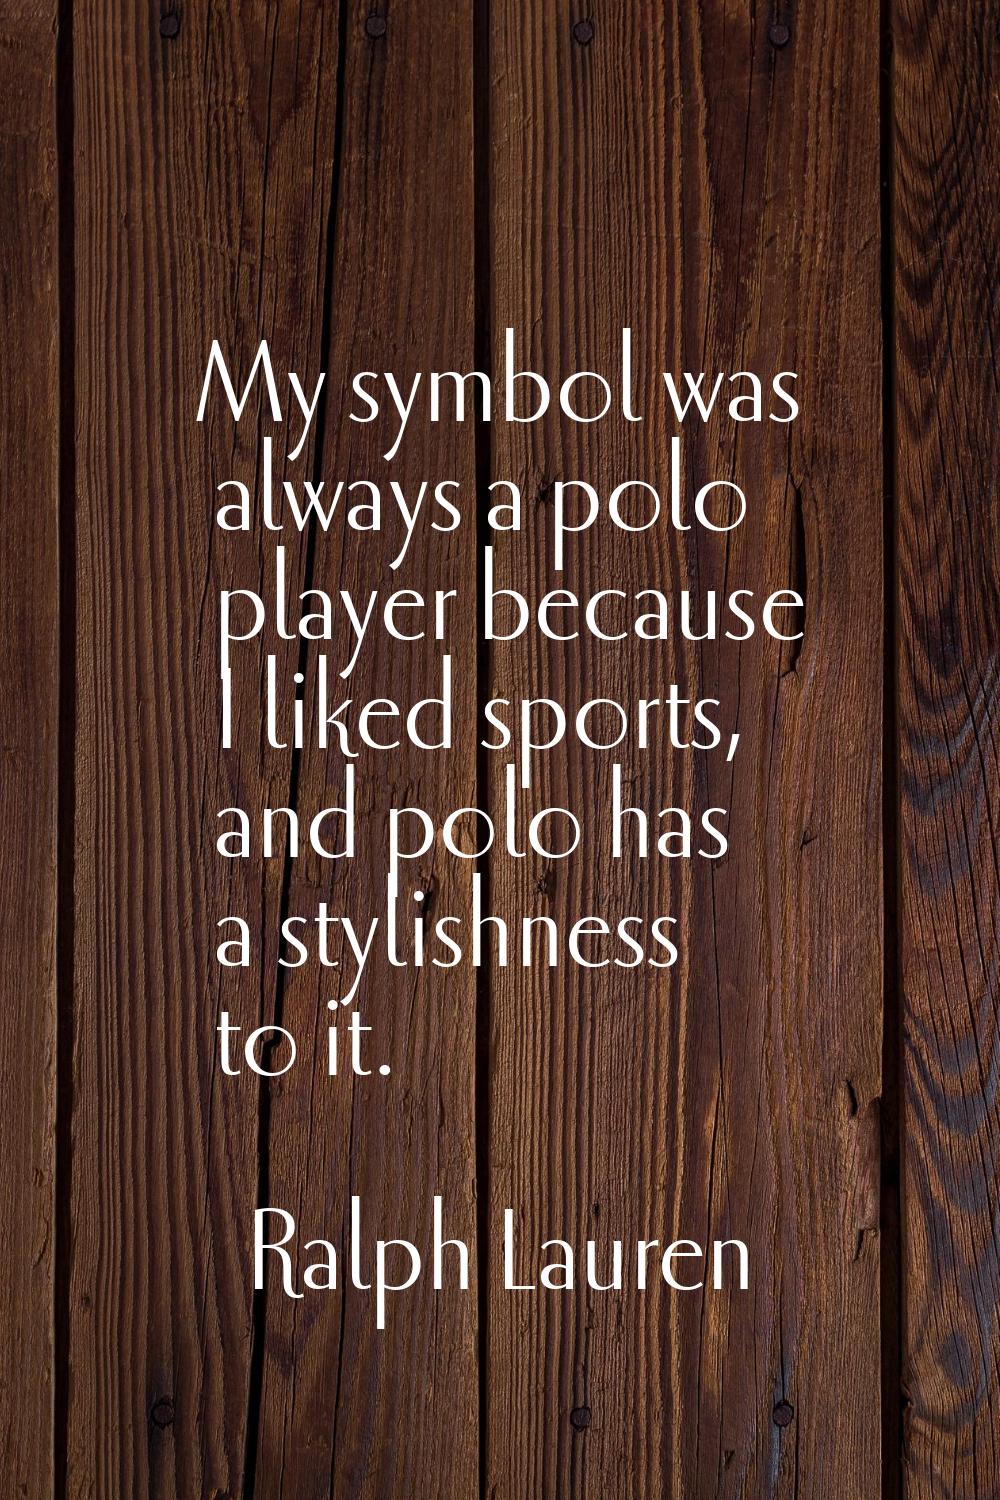 My symbol was always a polo player because I liked sports, and polo has a stylishness to it.